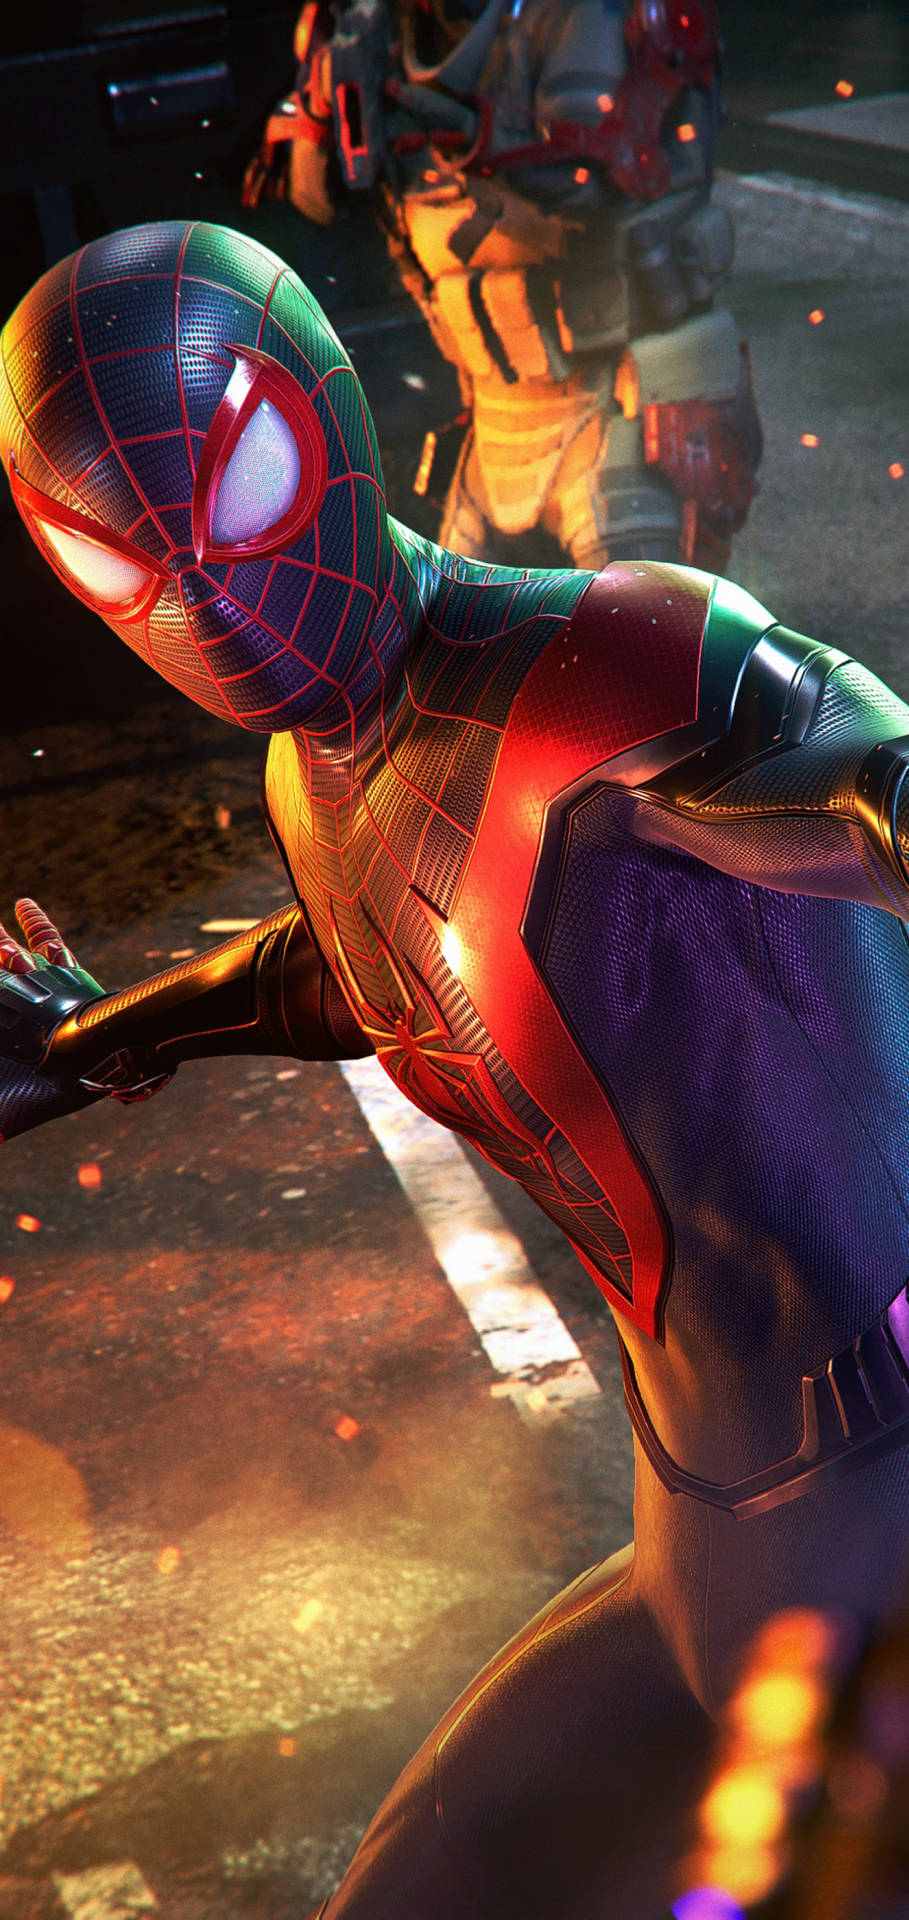 Striking Snapshot Of Spider-man: Miles Morales Character In Action On Ps5 Wallpaper